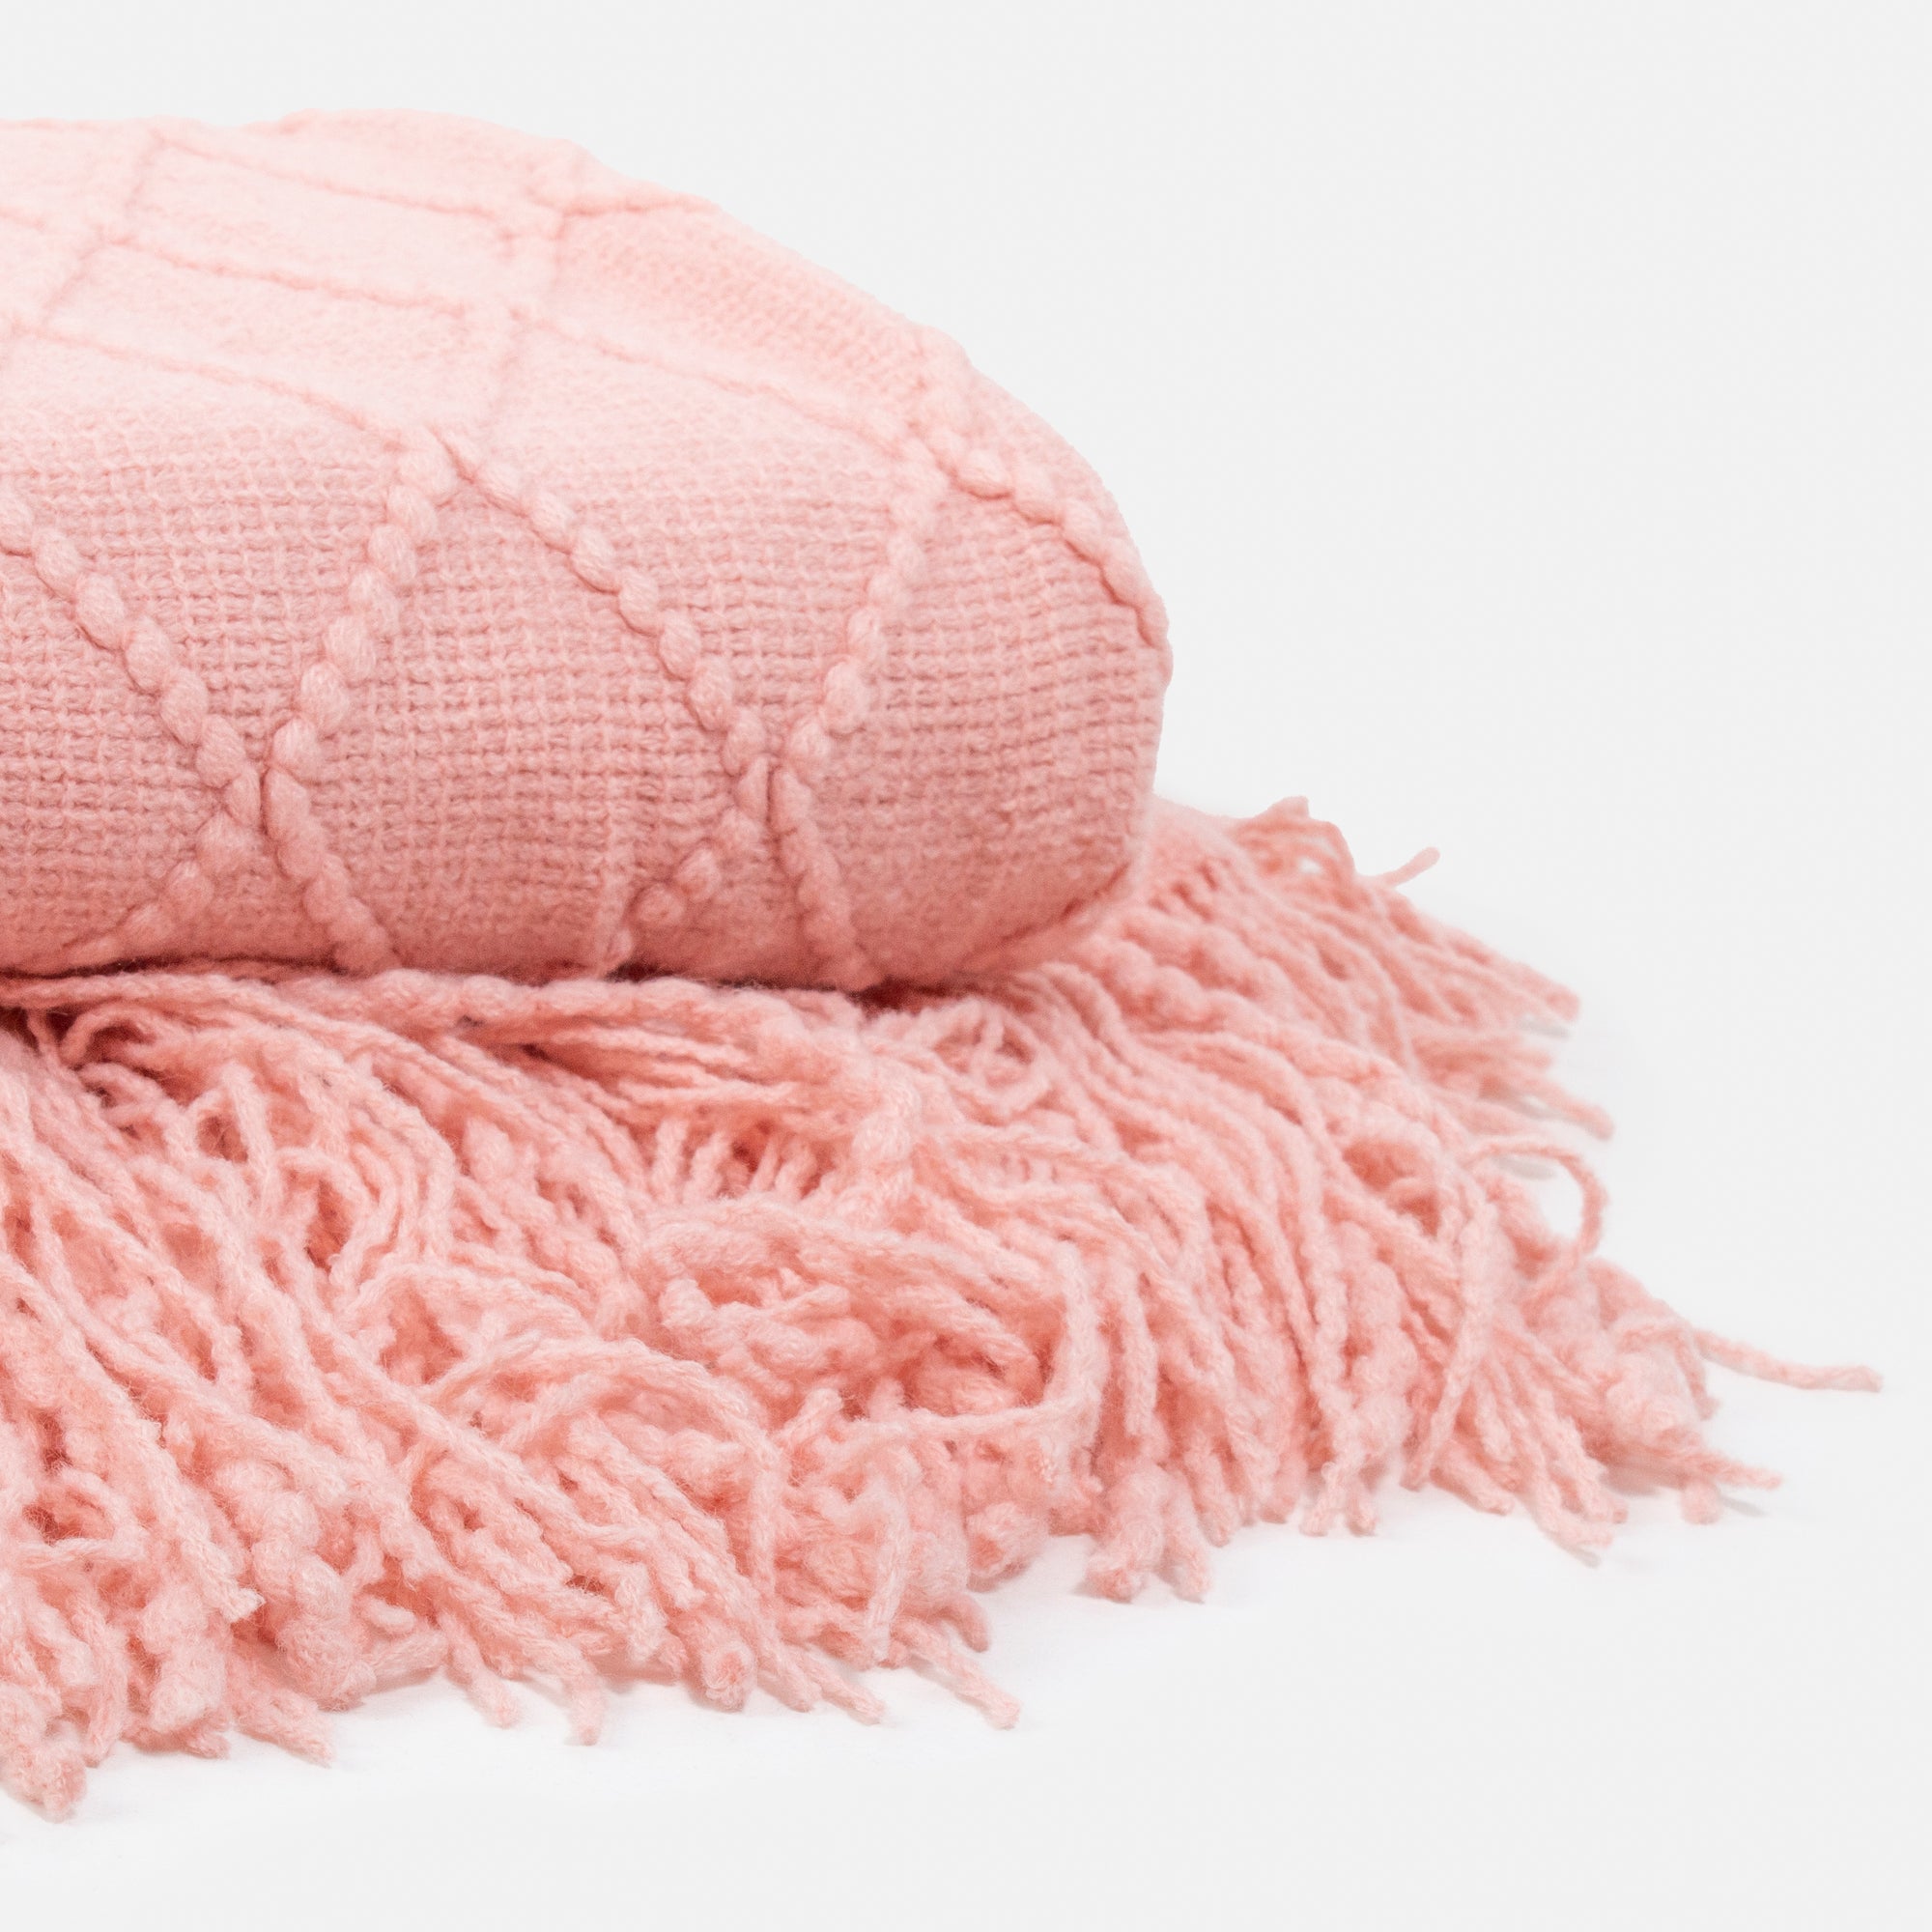 Pale pink blanket with diamond patterns and fringes